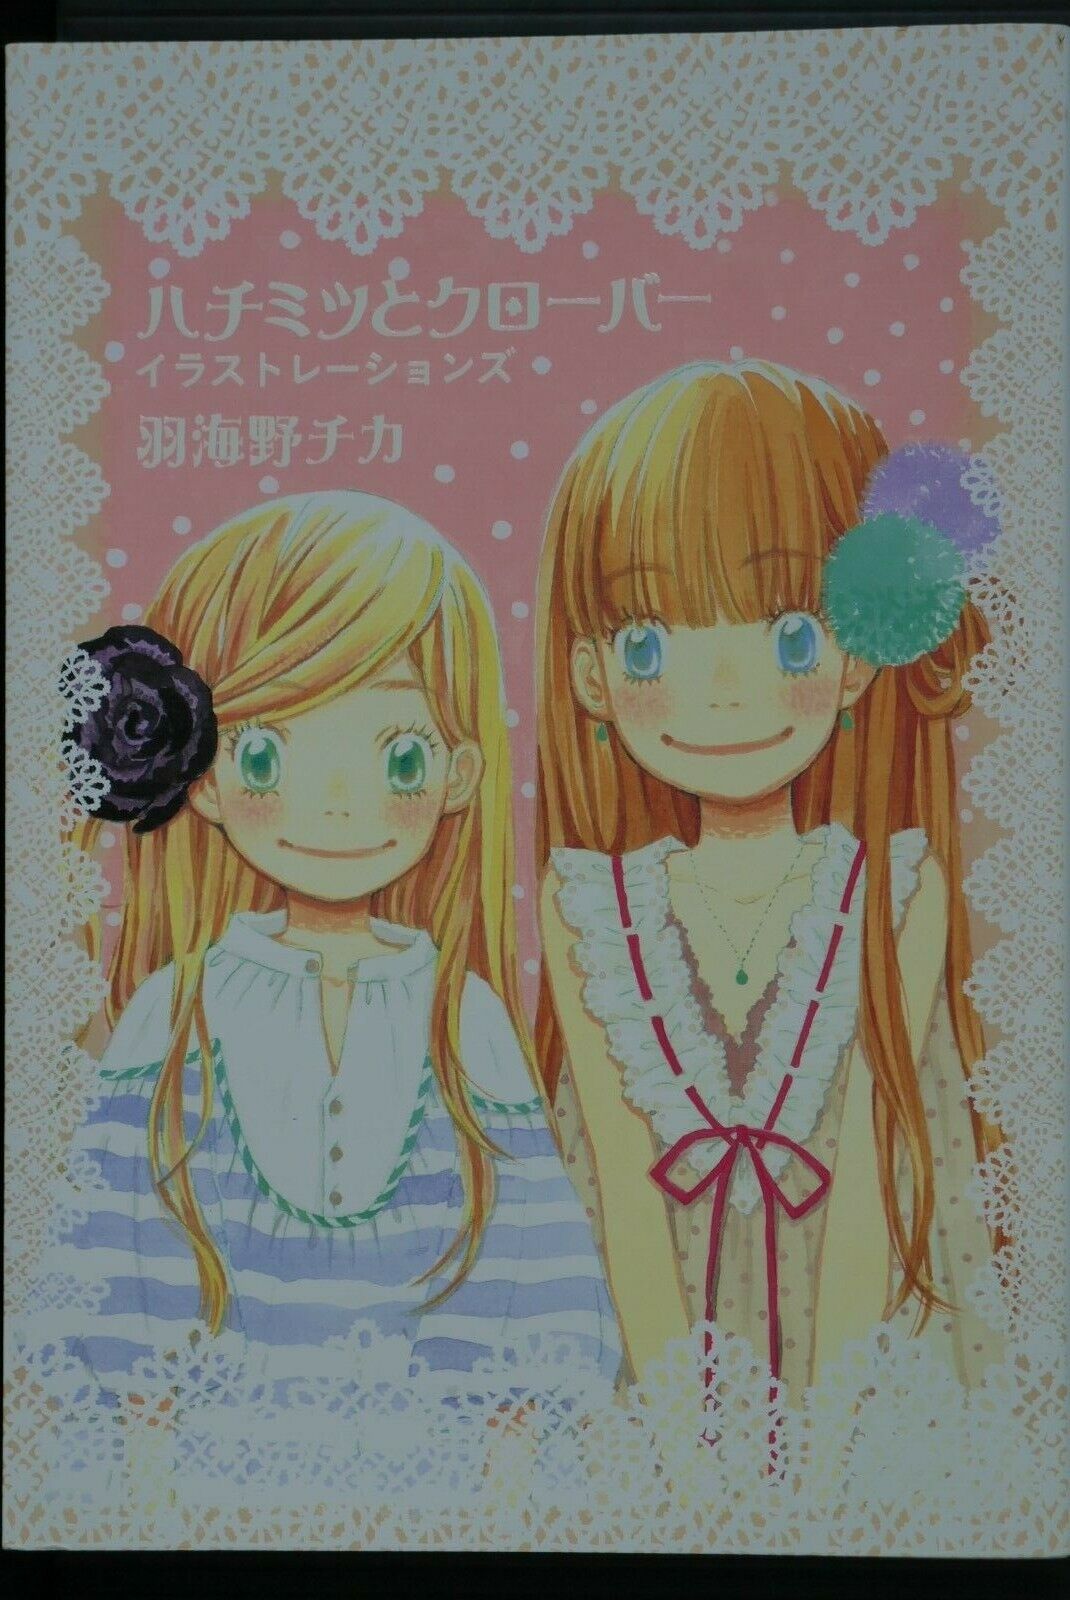 SHOHAN OOP: Honey and Clover ART BOOK: Chika Umino Illustrations - from JAPAN